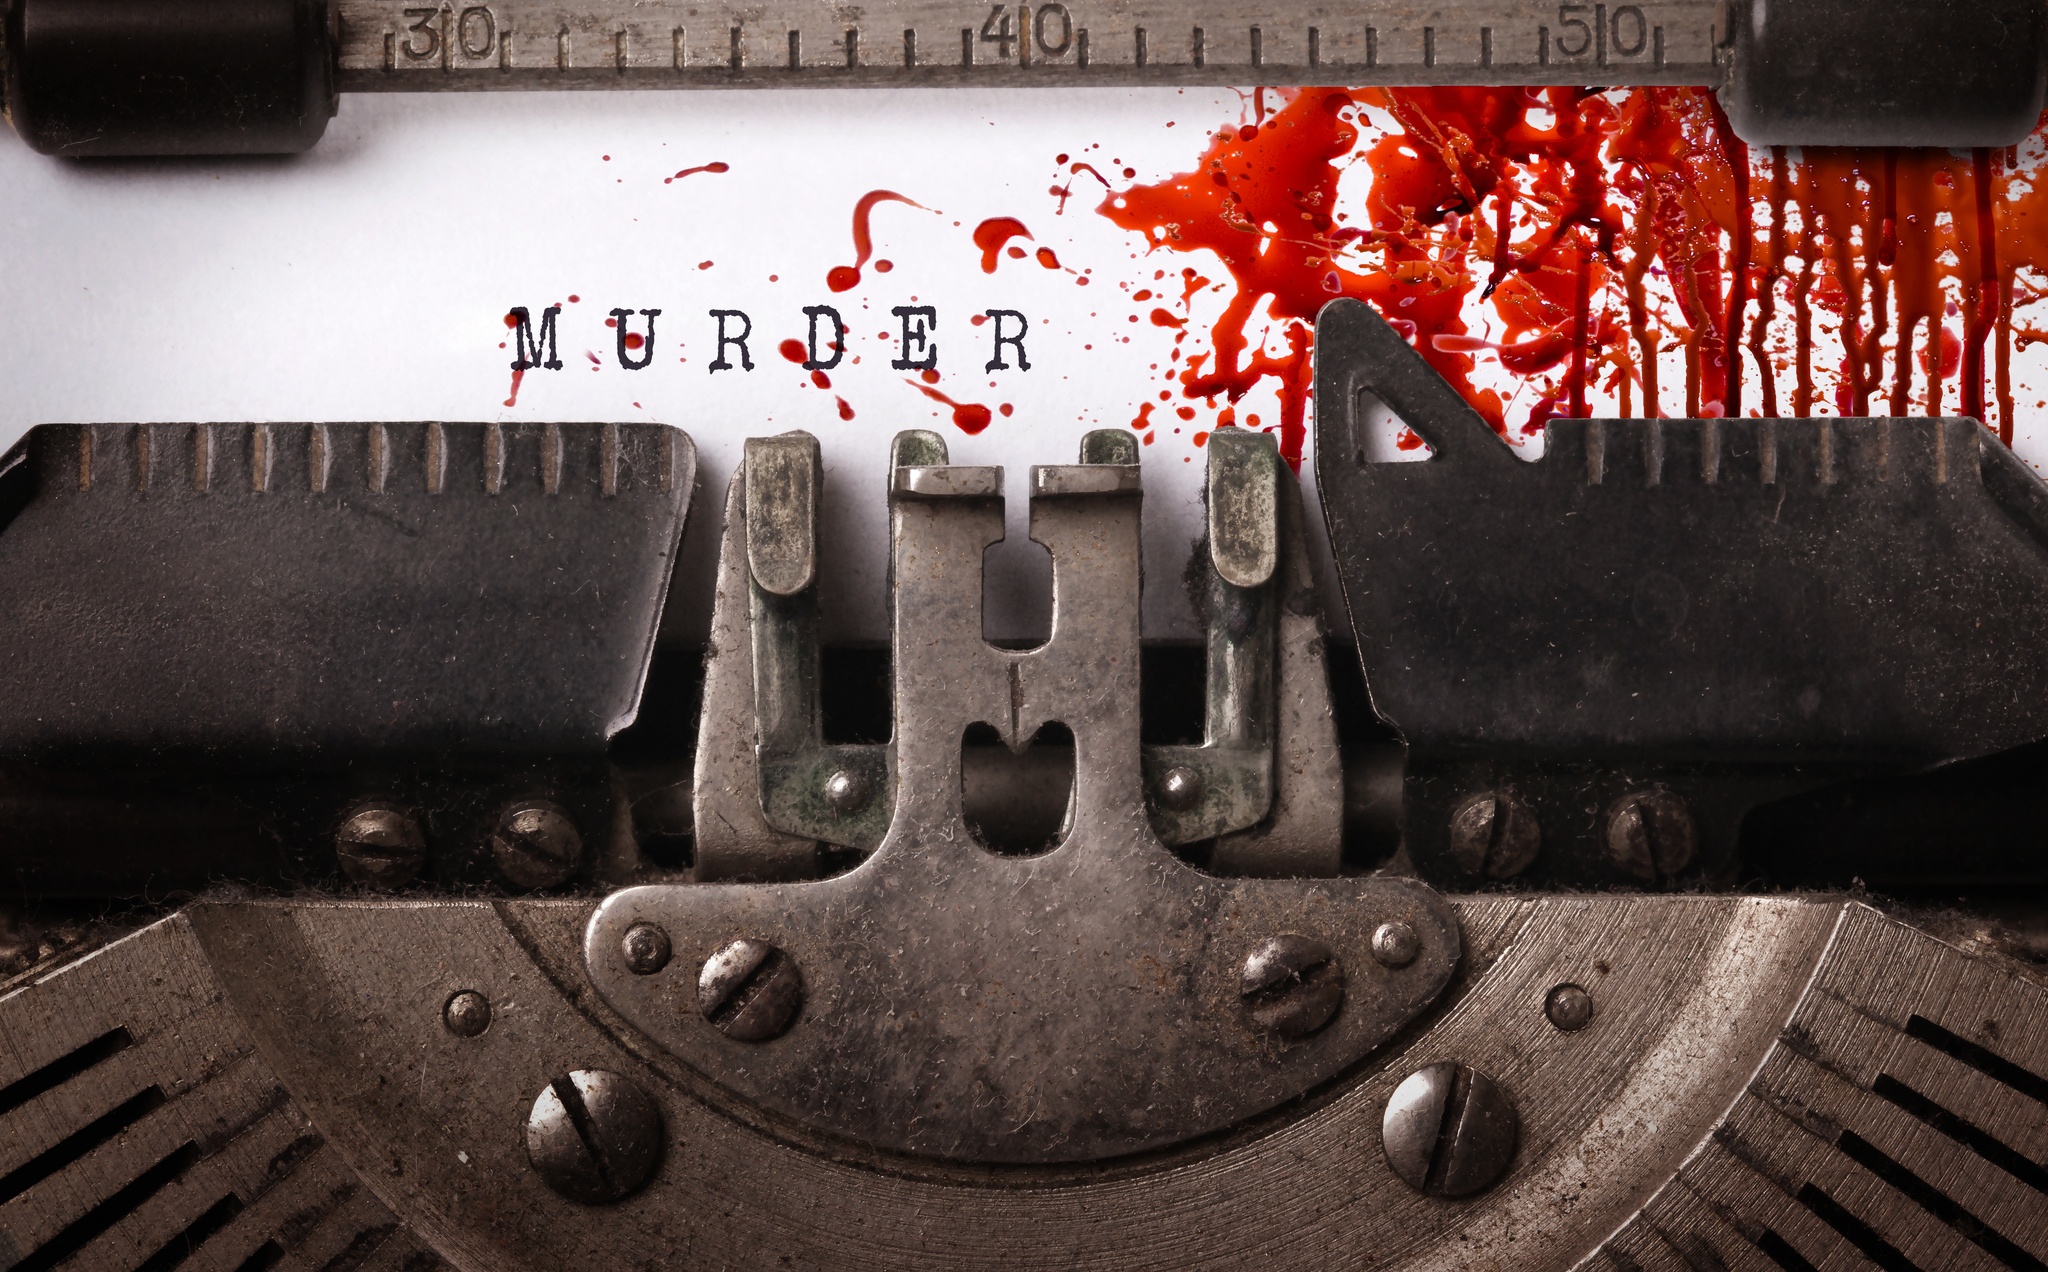 Bloody,Note,-,Vintage,Inscription,Made,By,Old,Typewriter,,Murder